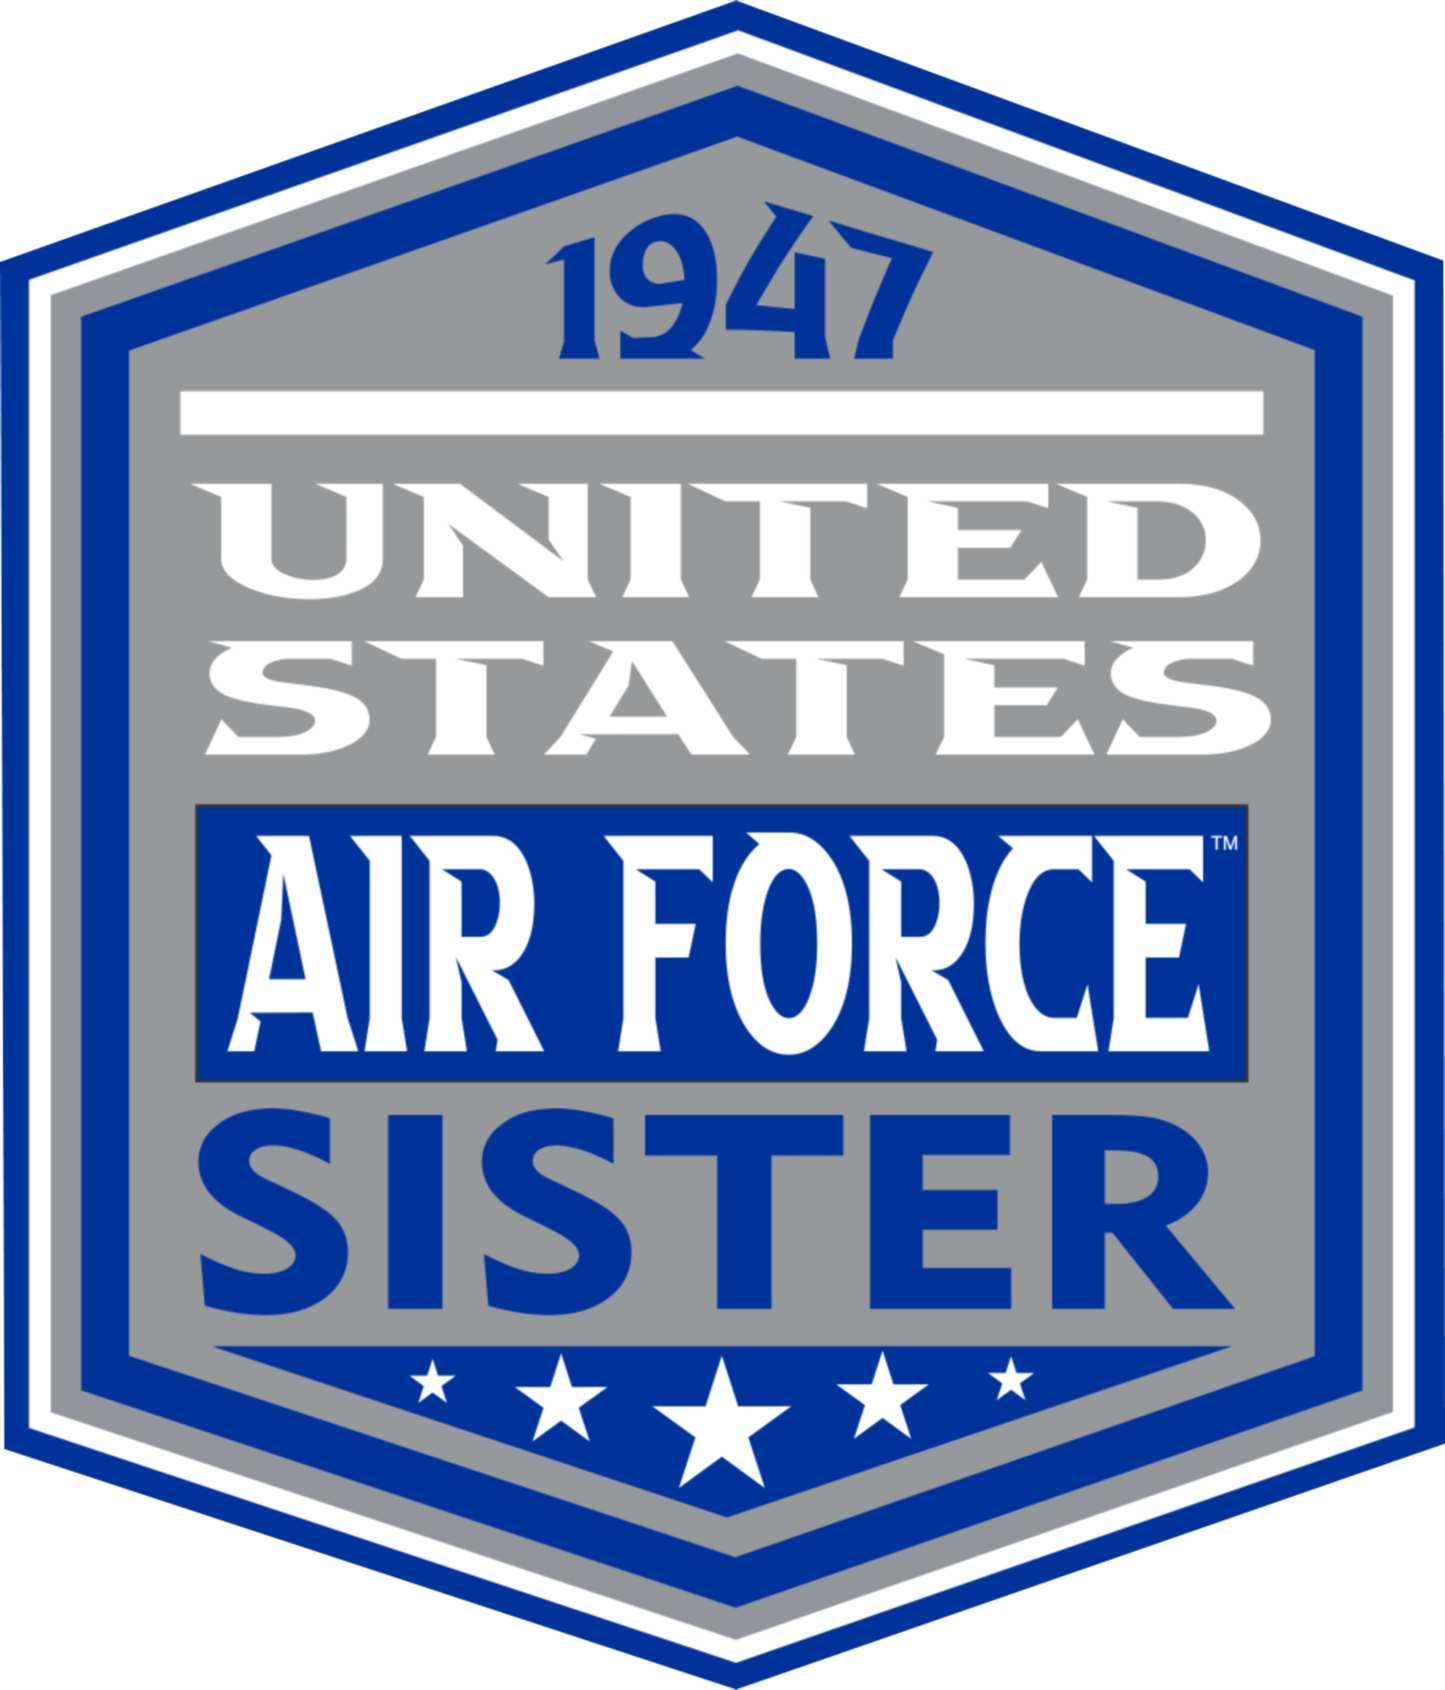 United States Air Force Sister 1947 Sticker